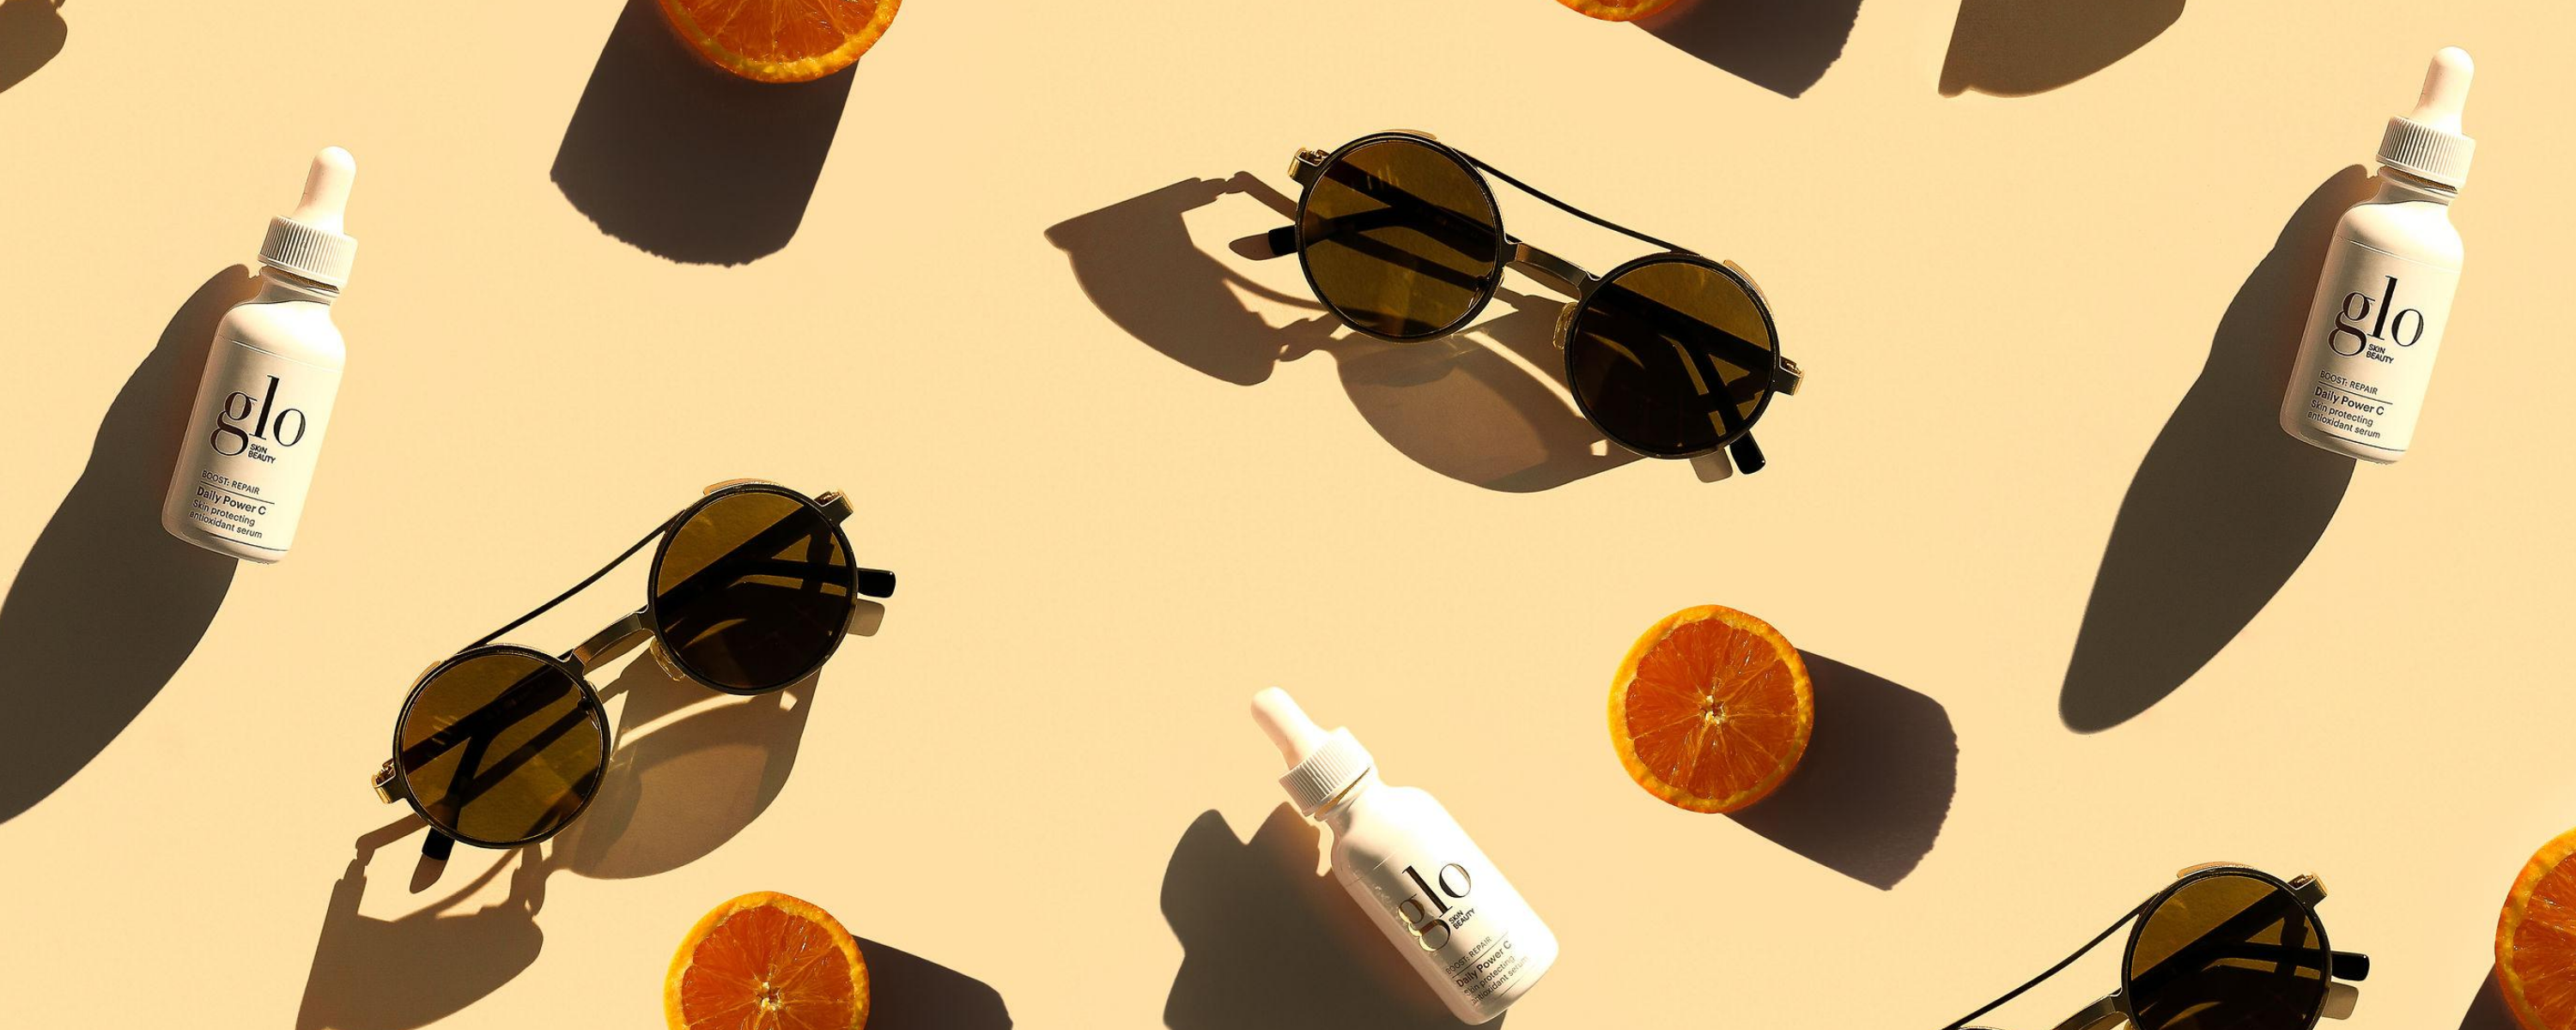 Summer Skincare Routines Aestheticians Swear By